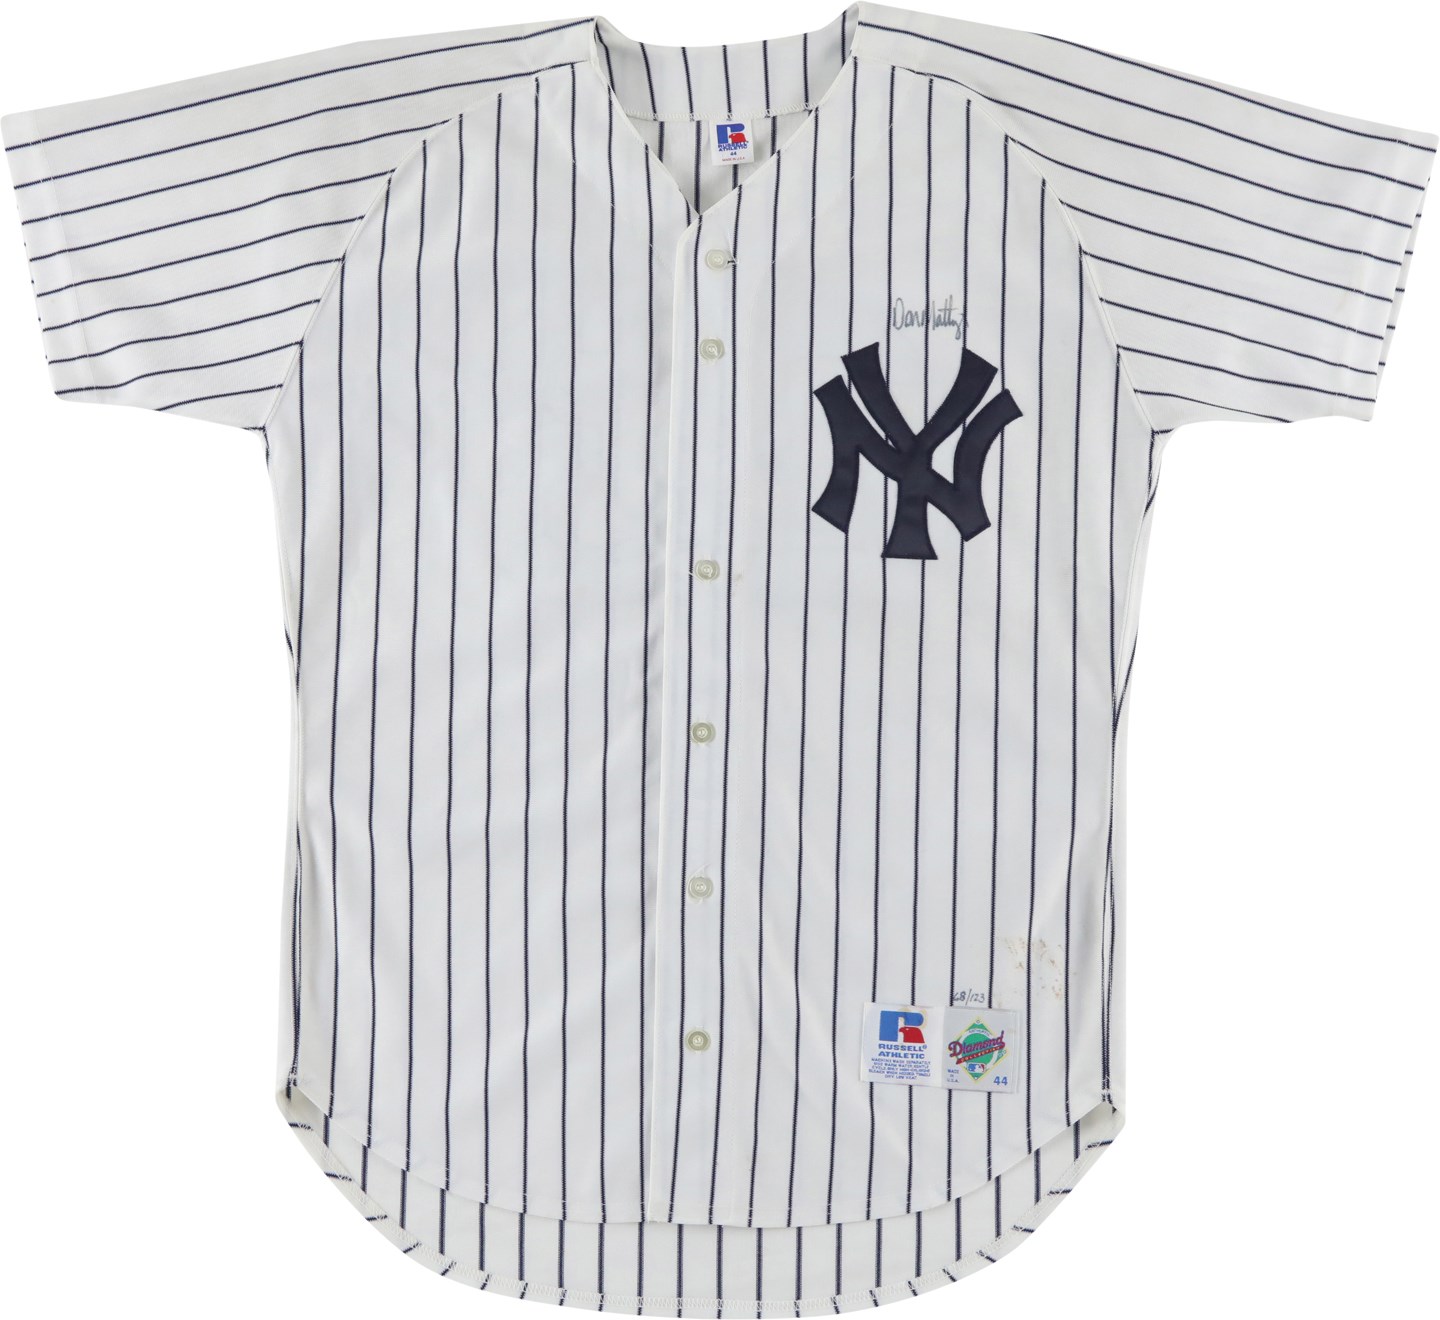 Don Mattingly Signed Limited Edition Yankees Jersey 68/123